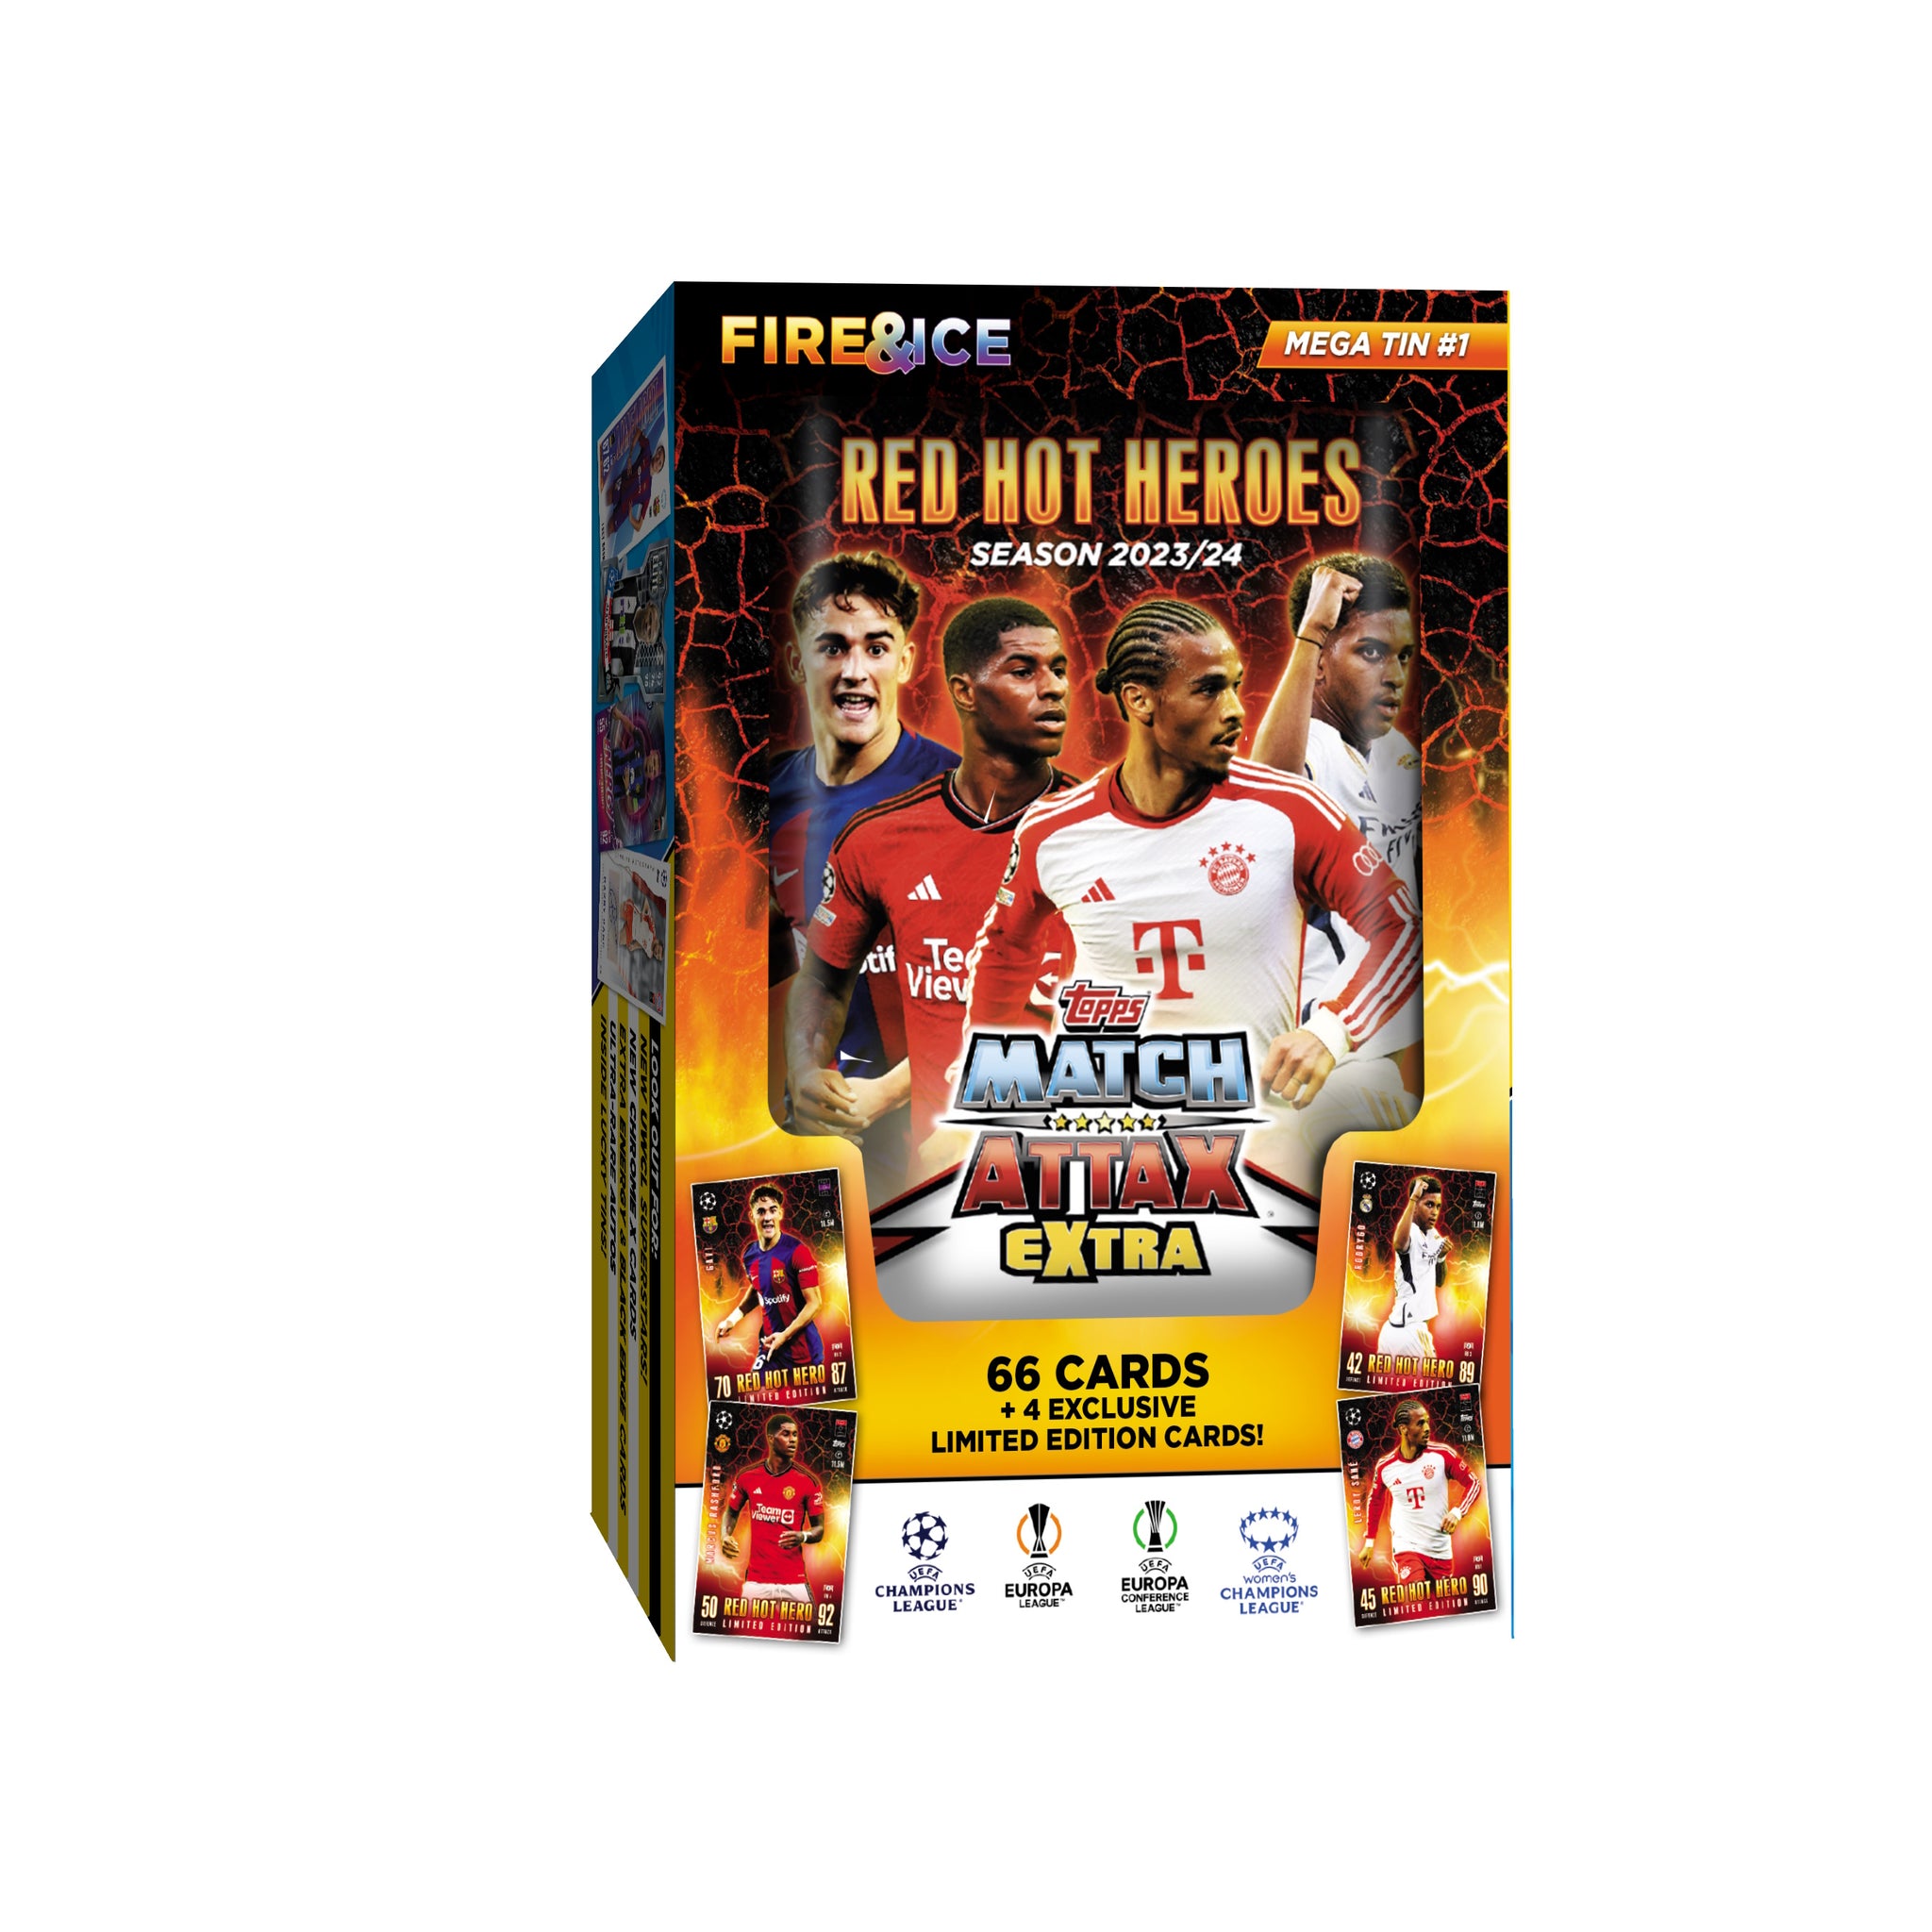 2023-24 TOPPS MATCH ATTAX EXTRA CHAMPIONS LEAGUE CARDS - MEGA TIN (66 CARDS + 4 LE)